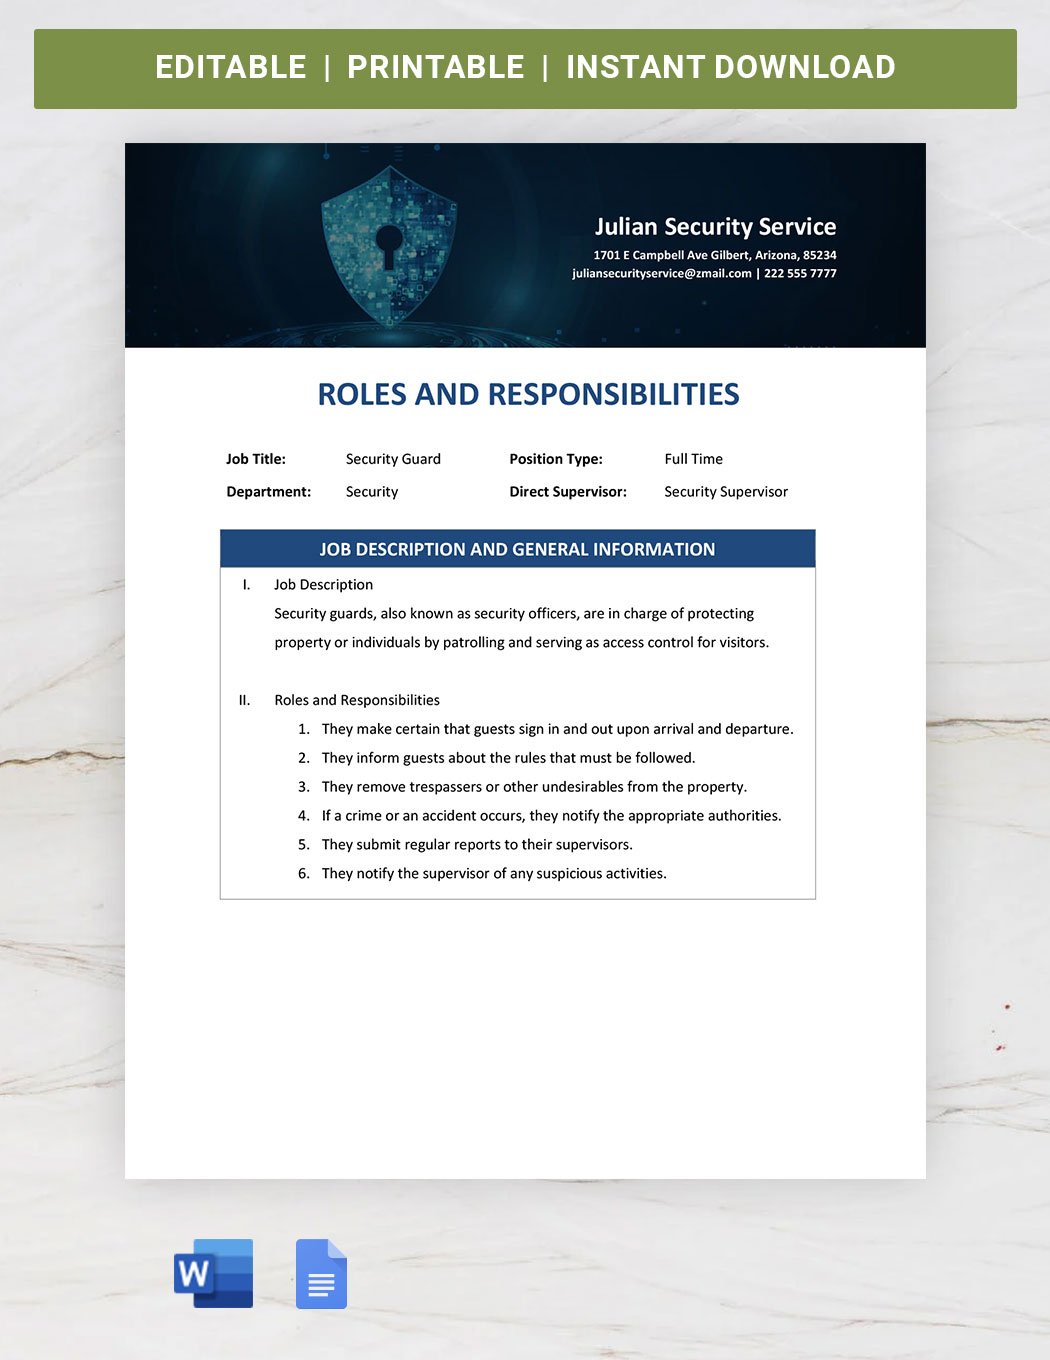 Security Roles And Responsibilities Template in Word, Google Docs